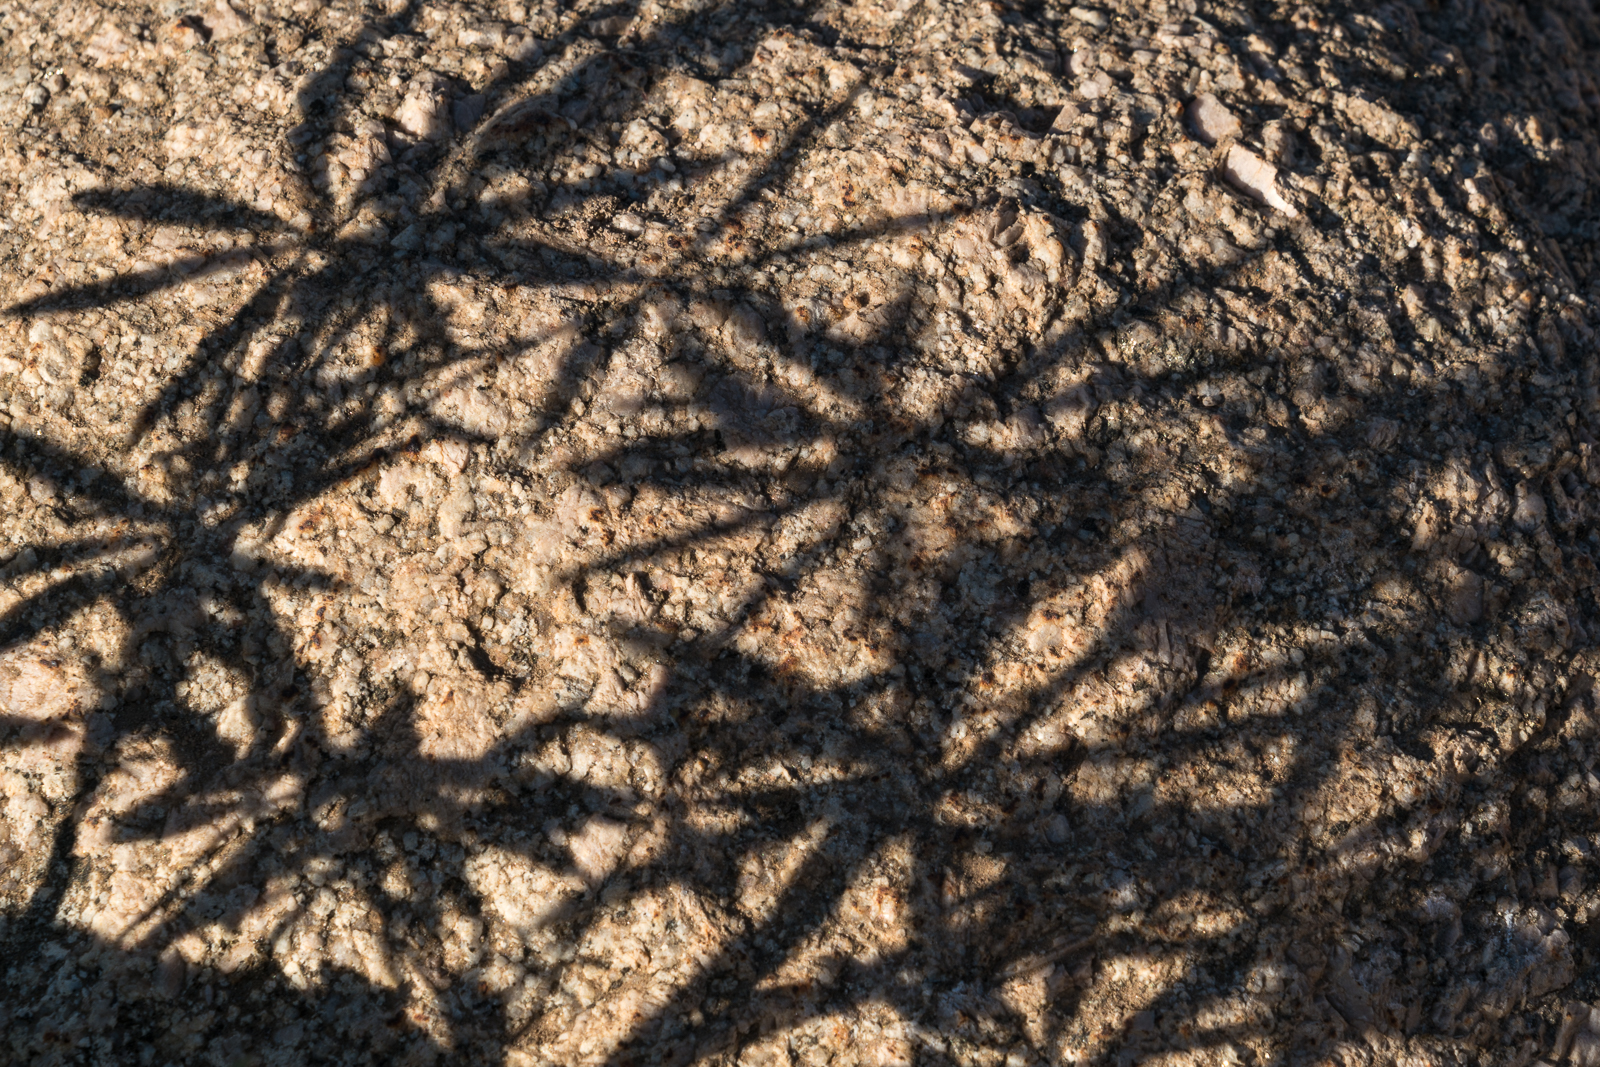 Shadows along the trail - Catalina State Park. March 2016.